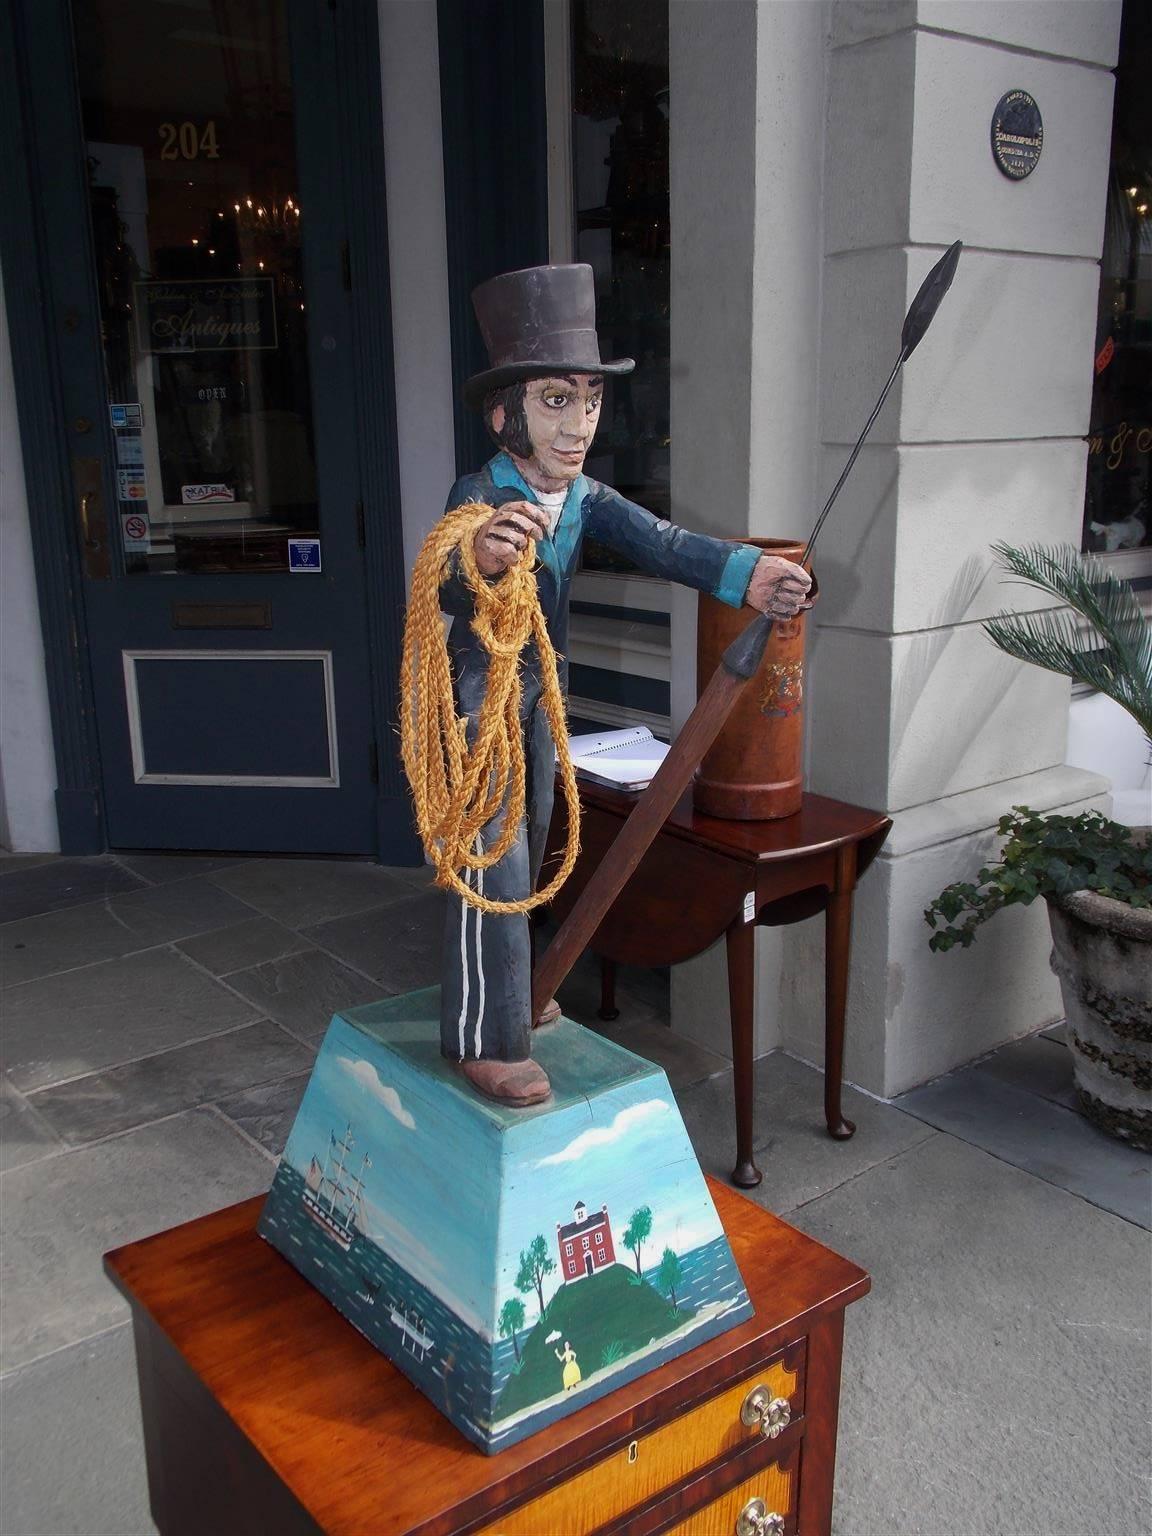 American hand-carved figural and painted nautical sculpture of Whaler. The wheel man is standing on a raised plinth holding a whaling iron, rope, and was used as a trade sign for a supply shop. Signed W. Northey, 19th Century